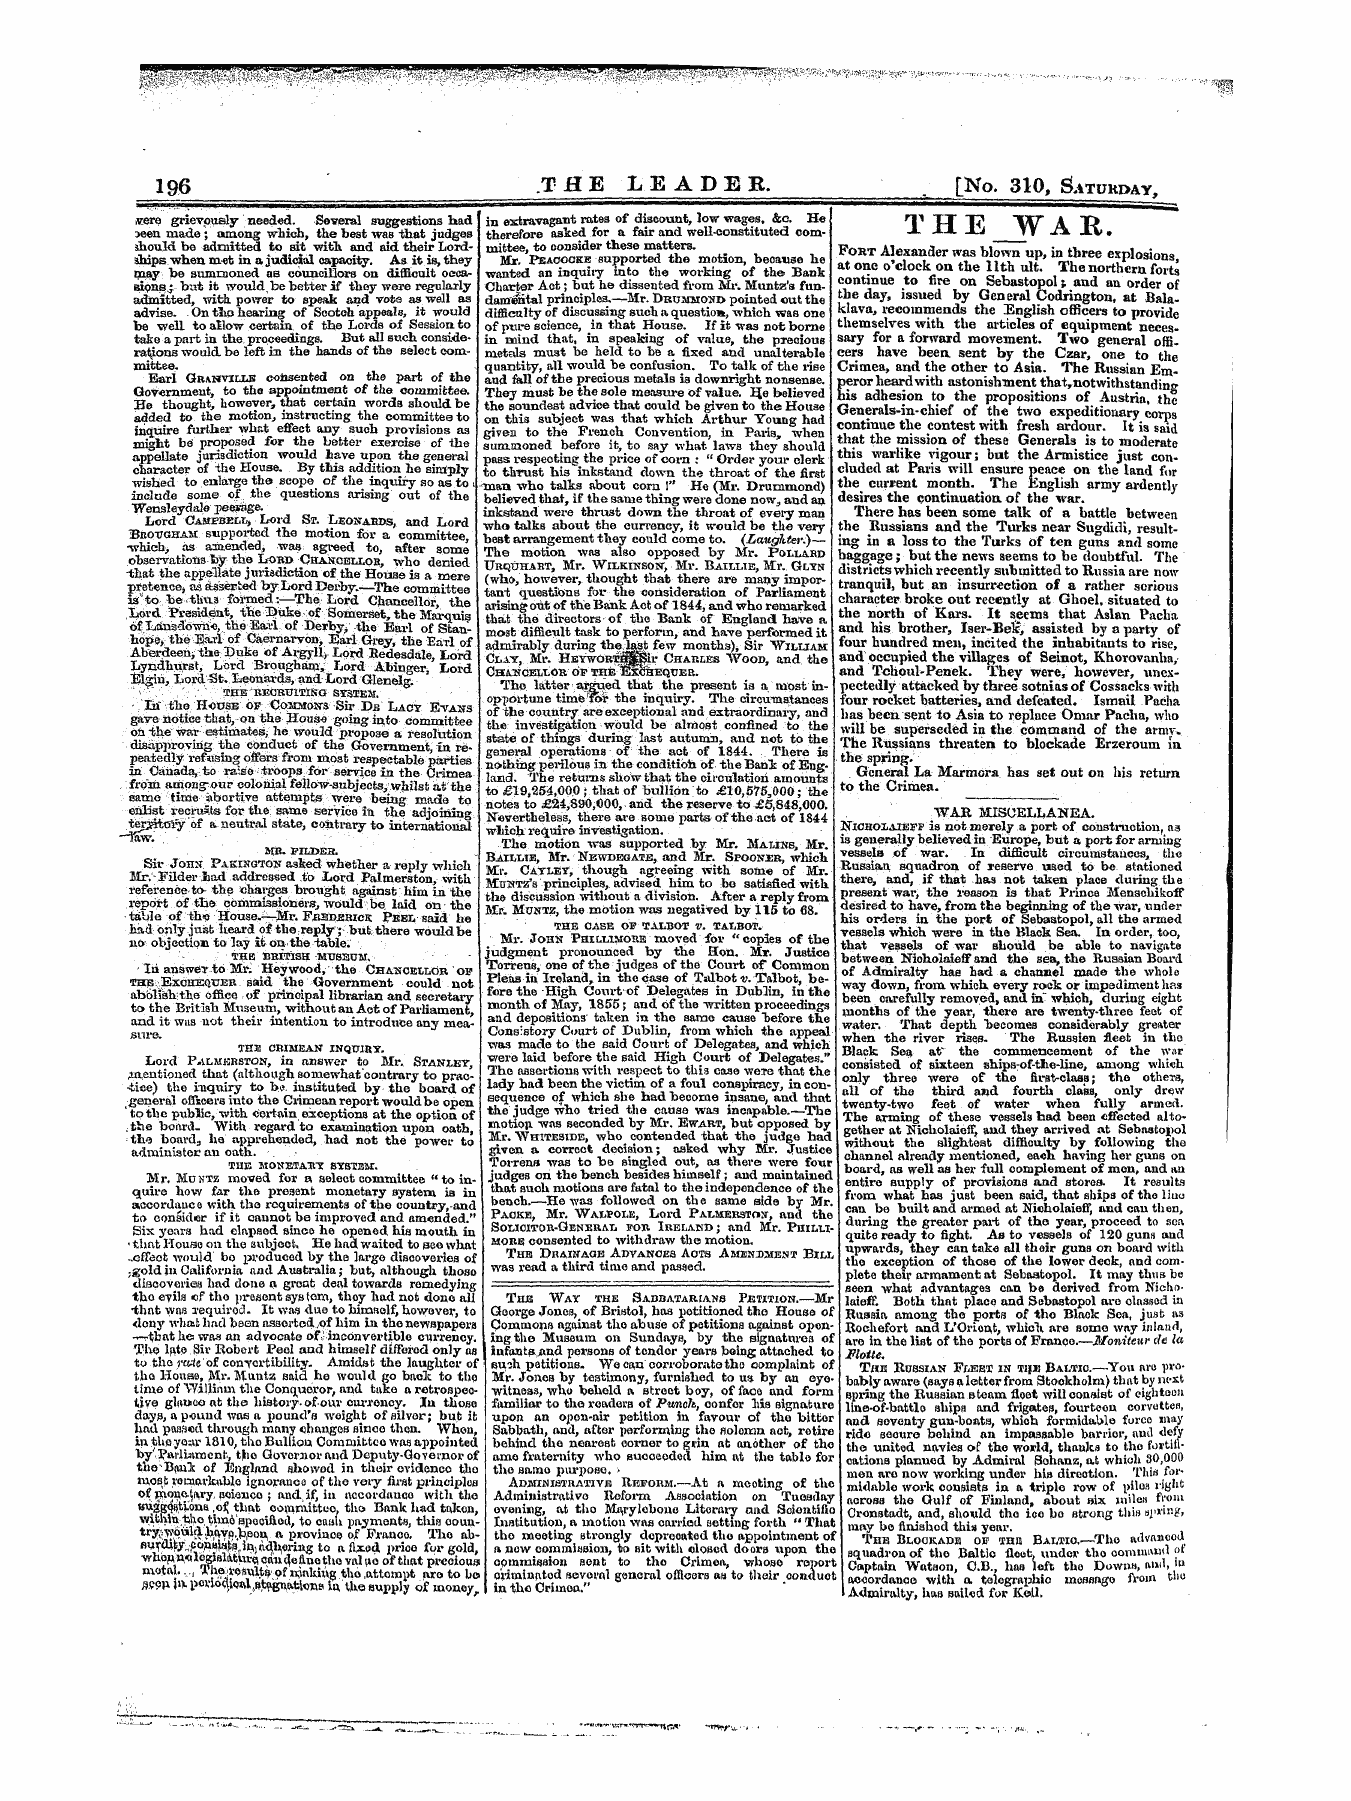 Leader (1850-1860): jS F Y, 1st edition: 4